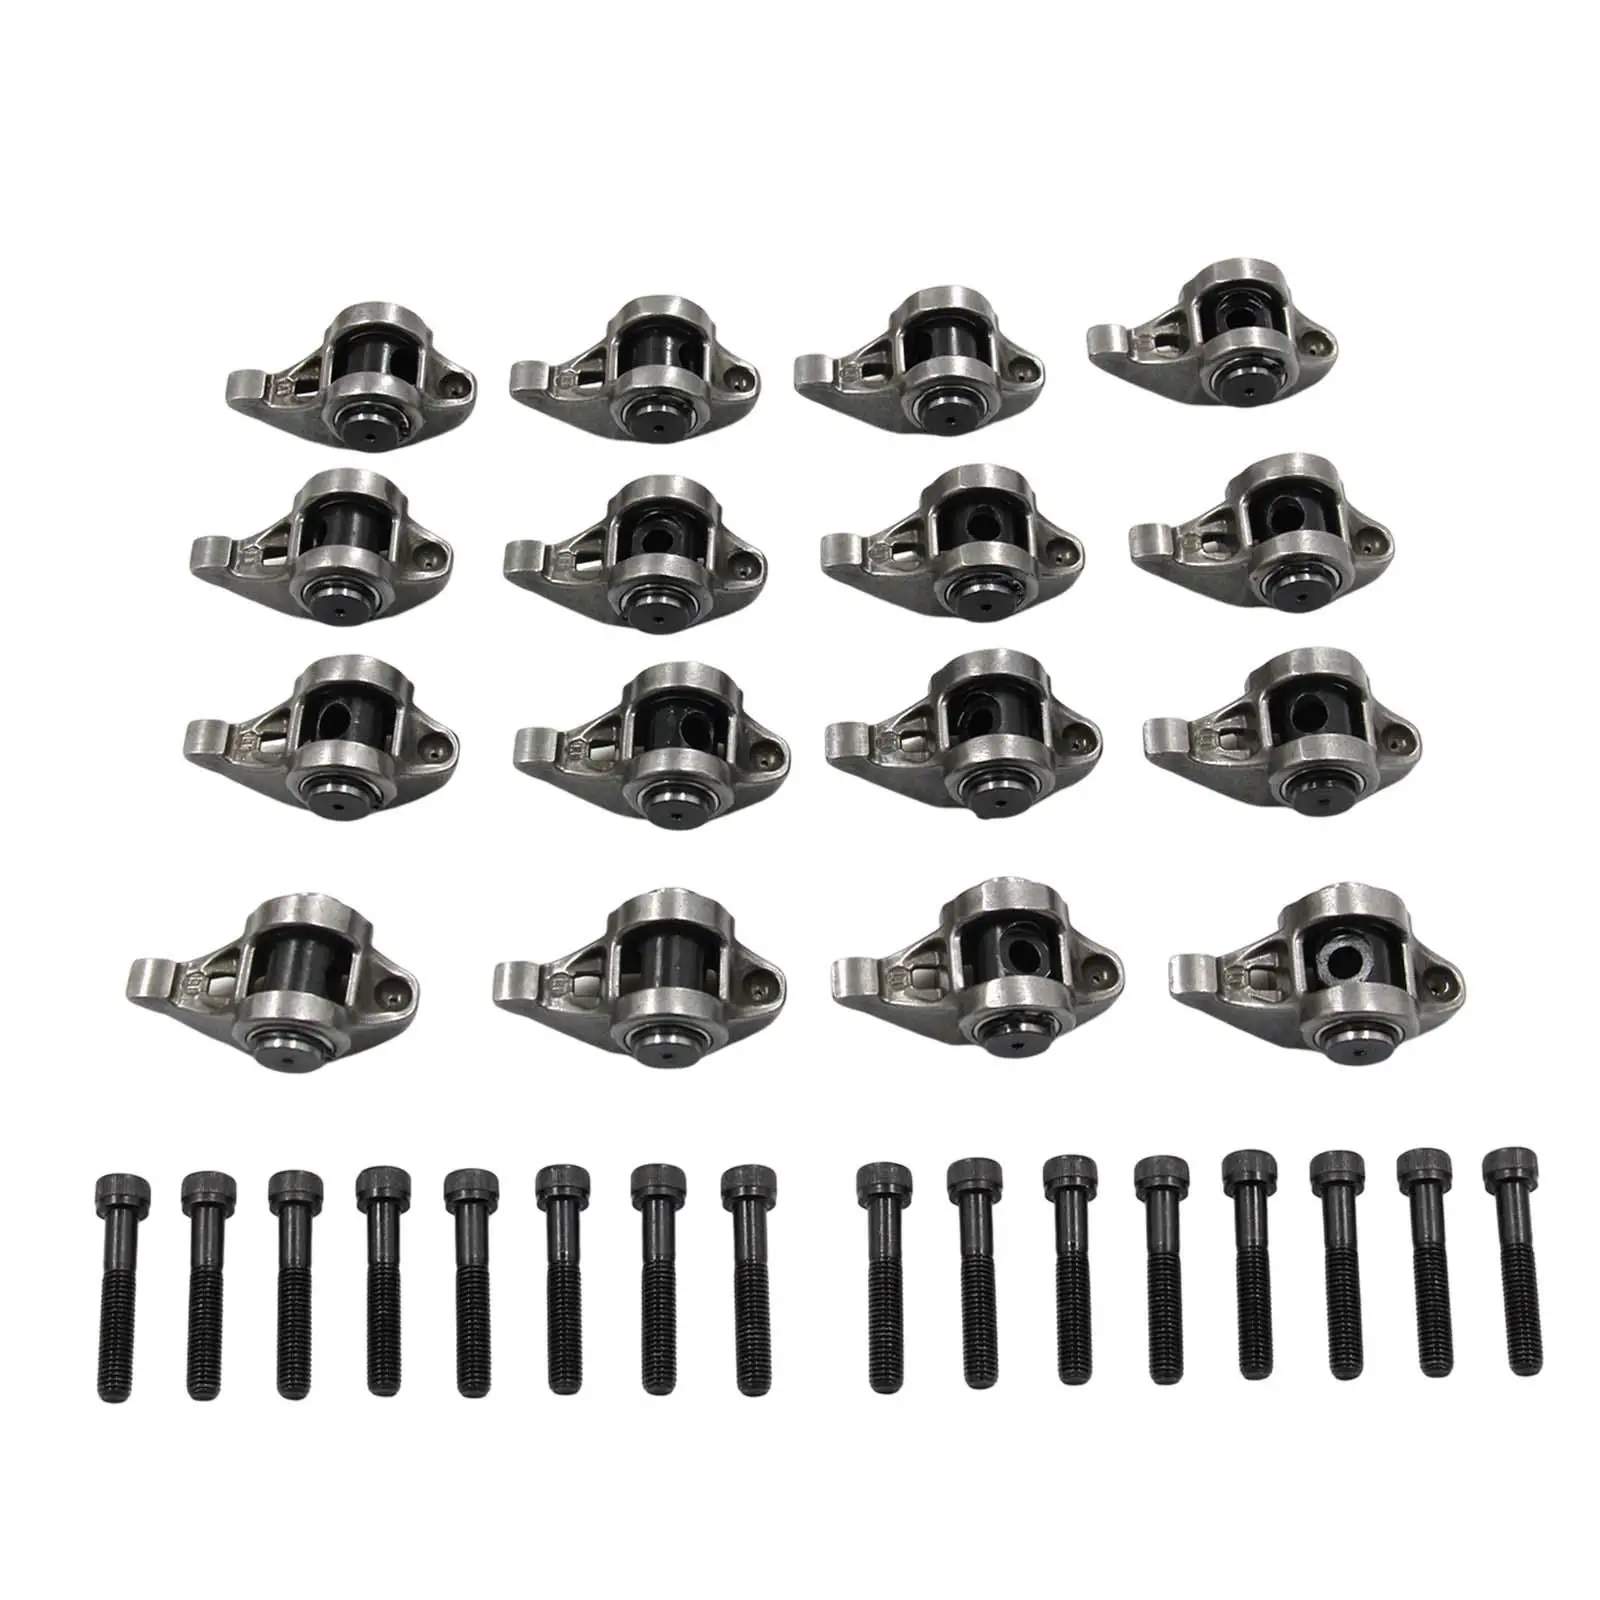 16 Pieces Rocker Arms and Bolts Kit 10214664 Steel Easy Installation Accessories